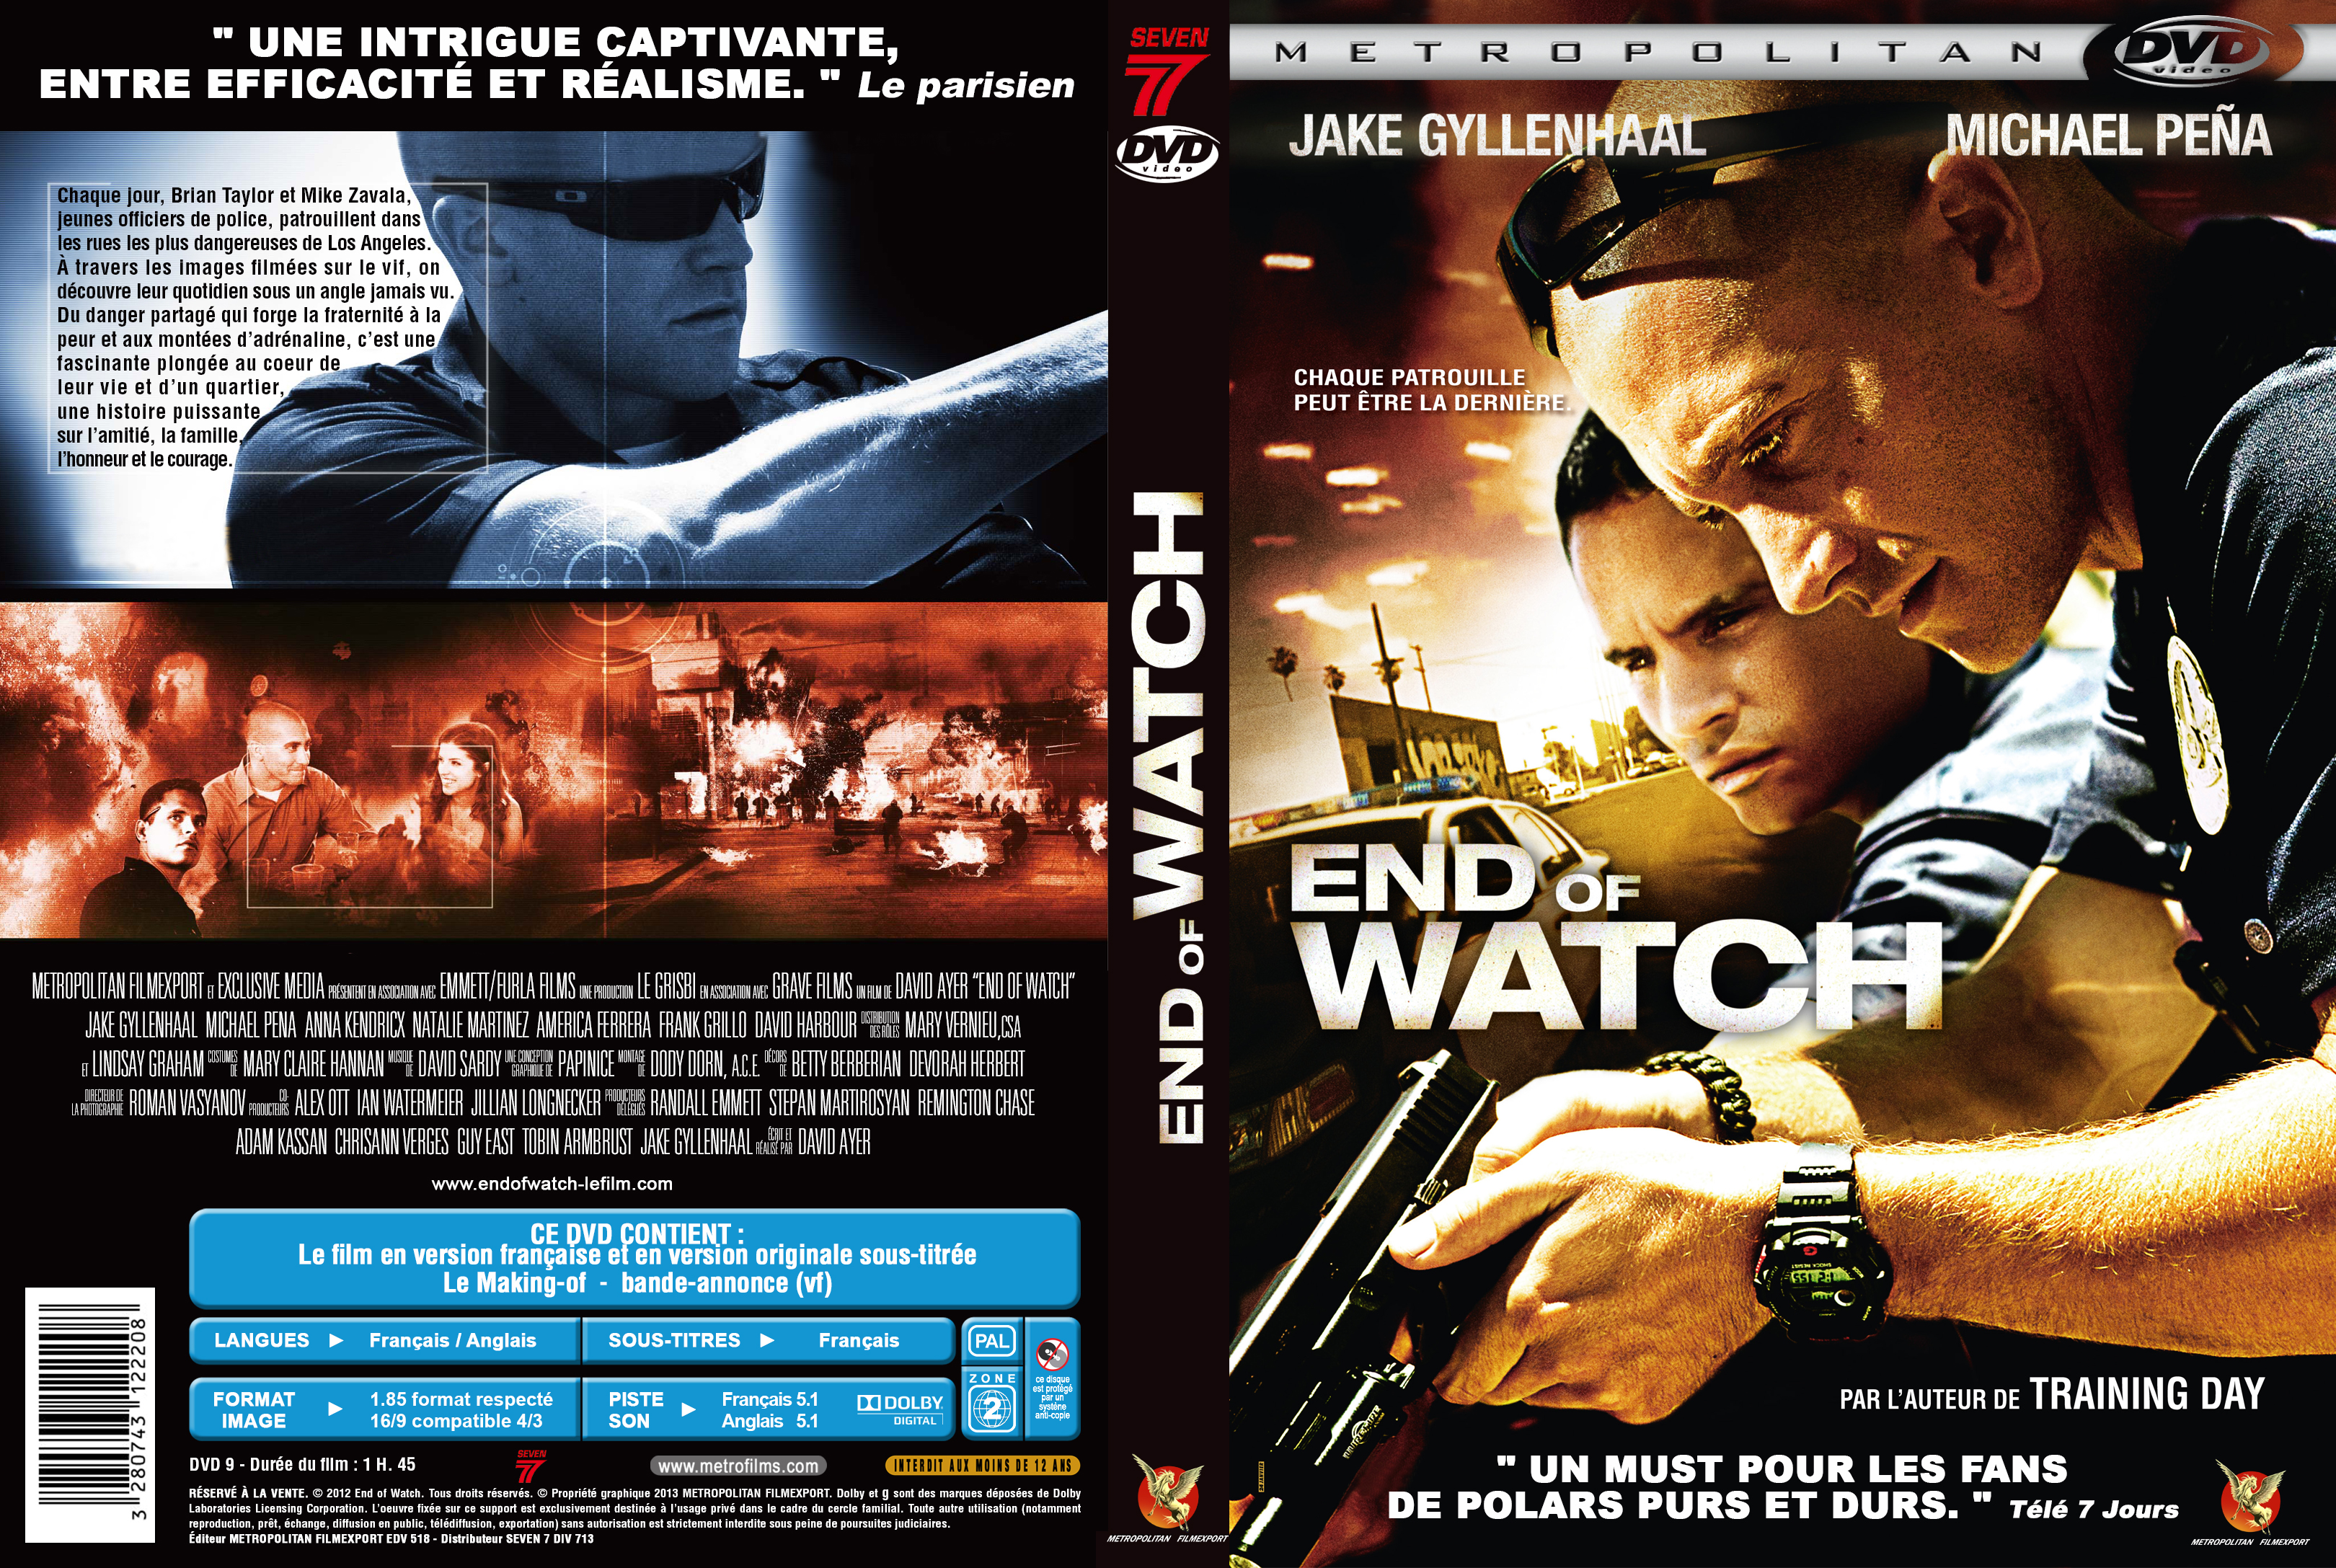 Jaquette DVD End of watch custom